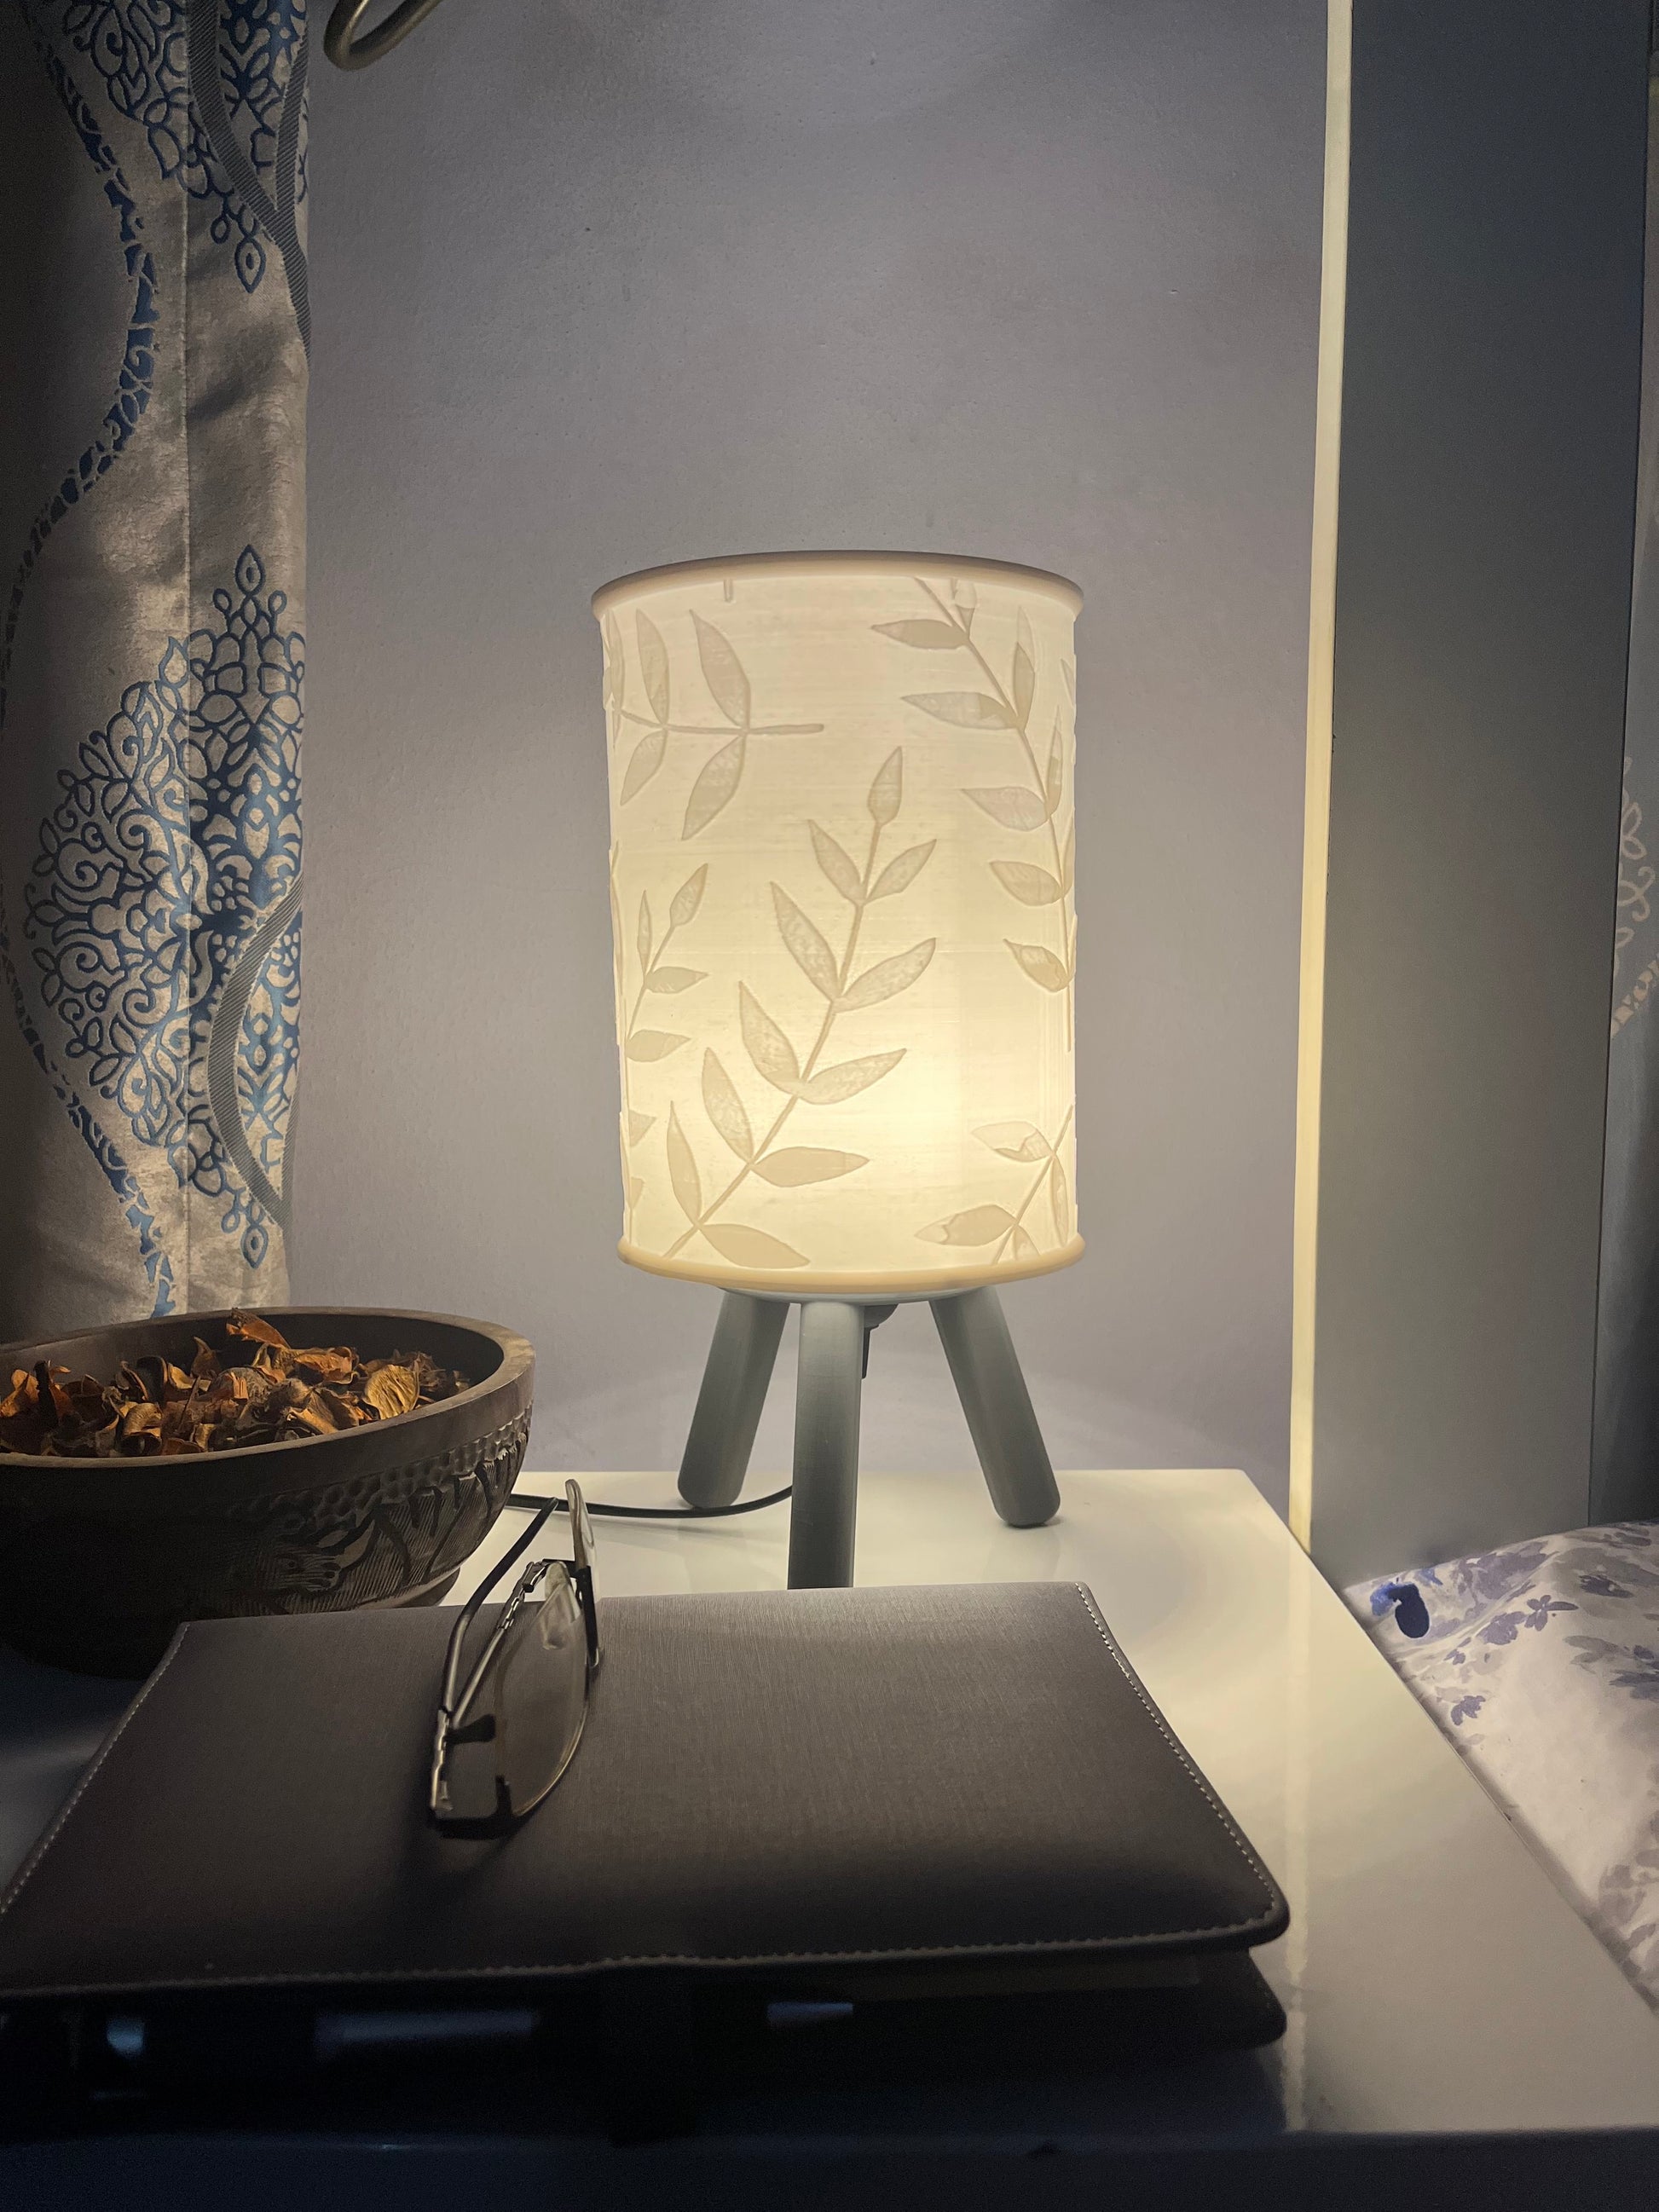 3D printed grey Hako bedside/table lamp on a bedside table